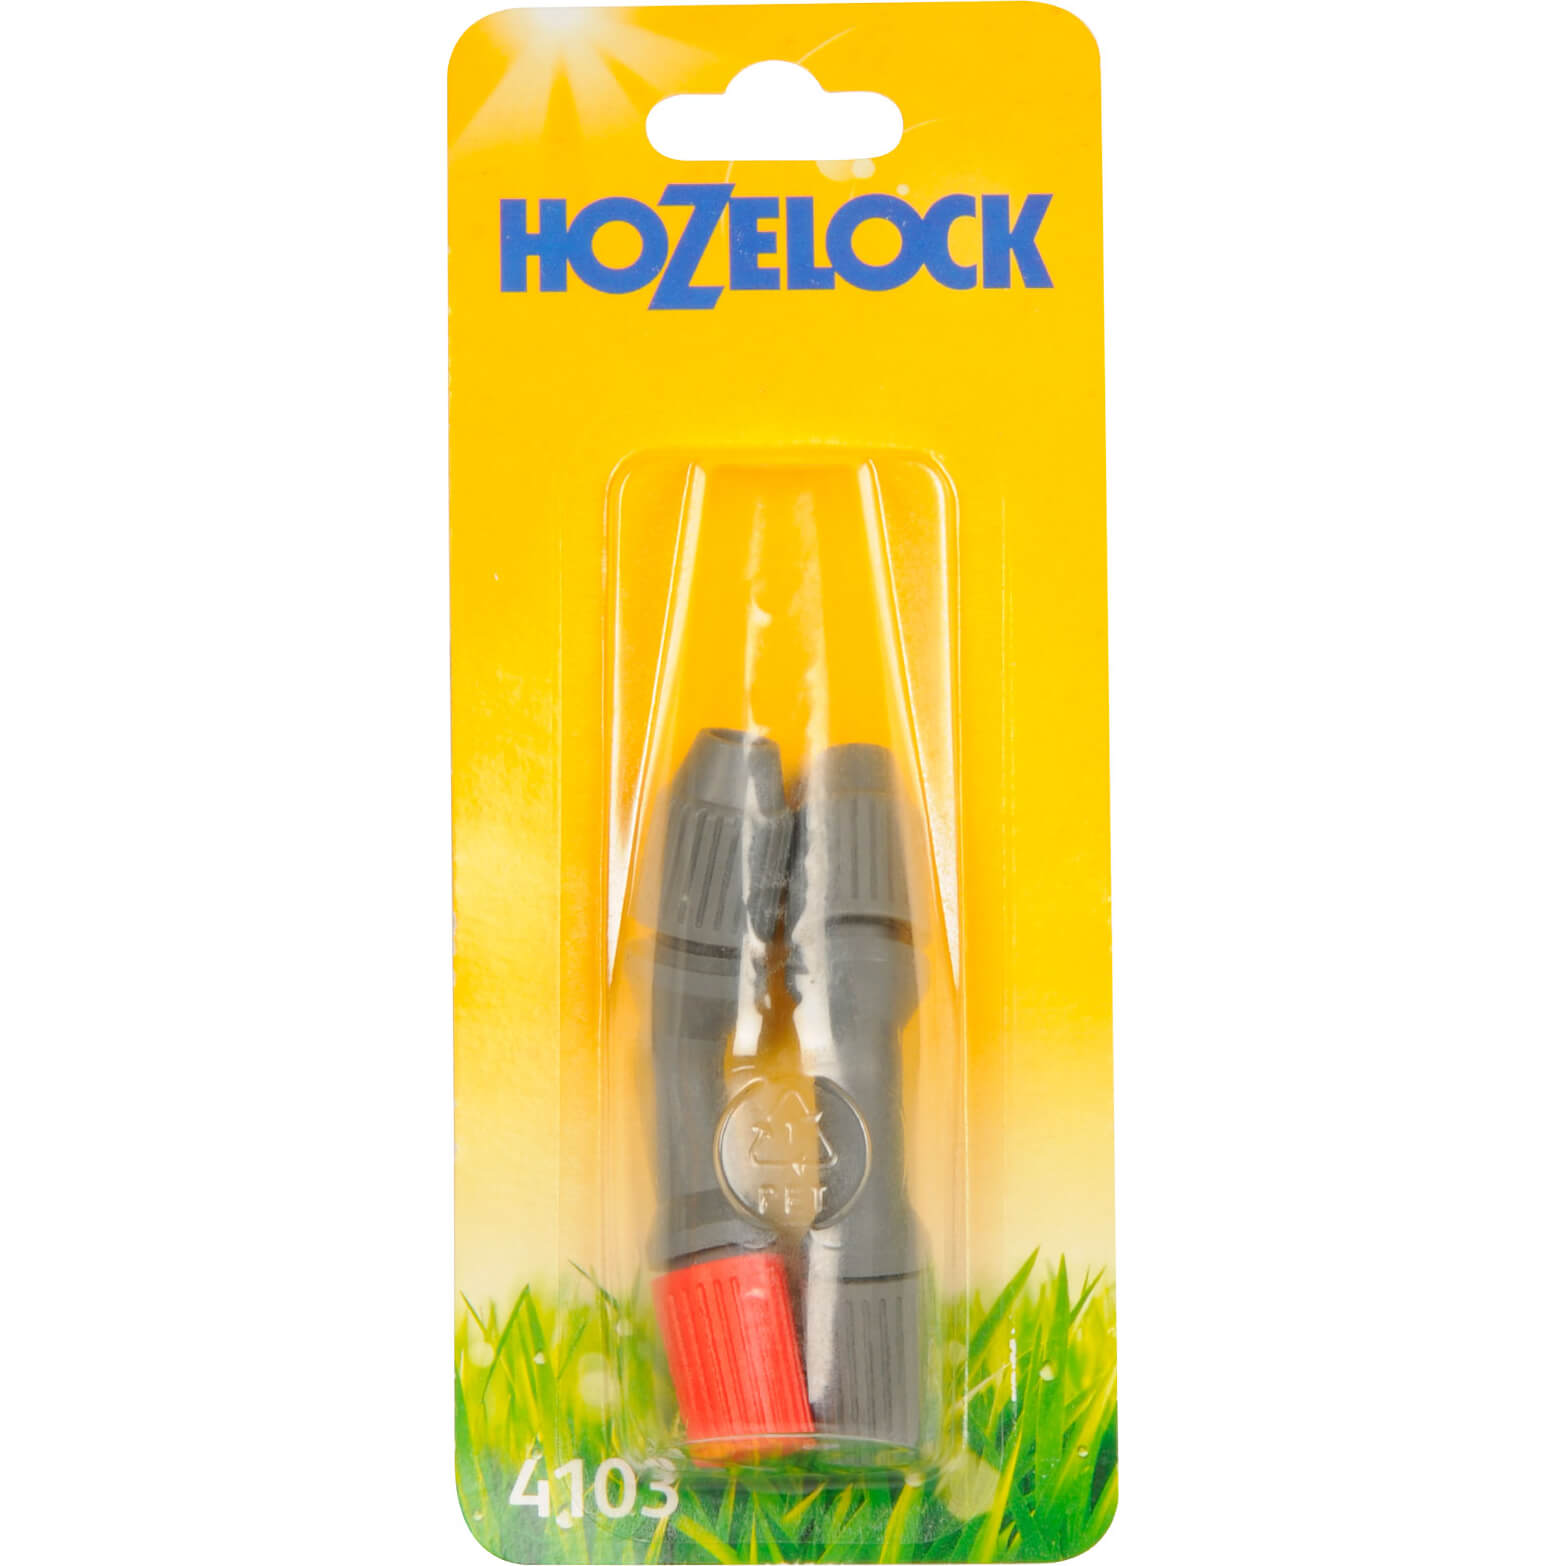 Image of Hozelock Spray Nozzle Set for Standard and Plus Pressure Sprayers